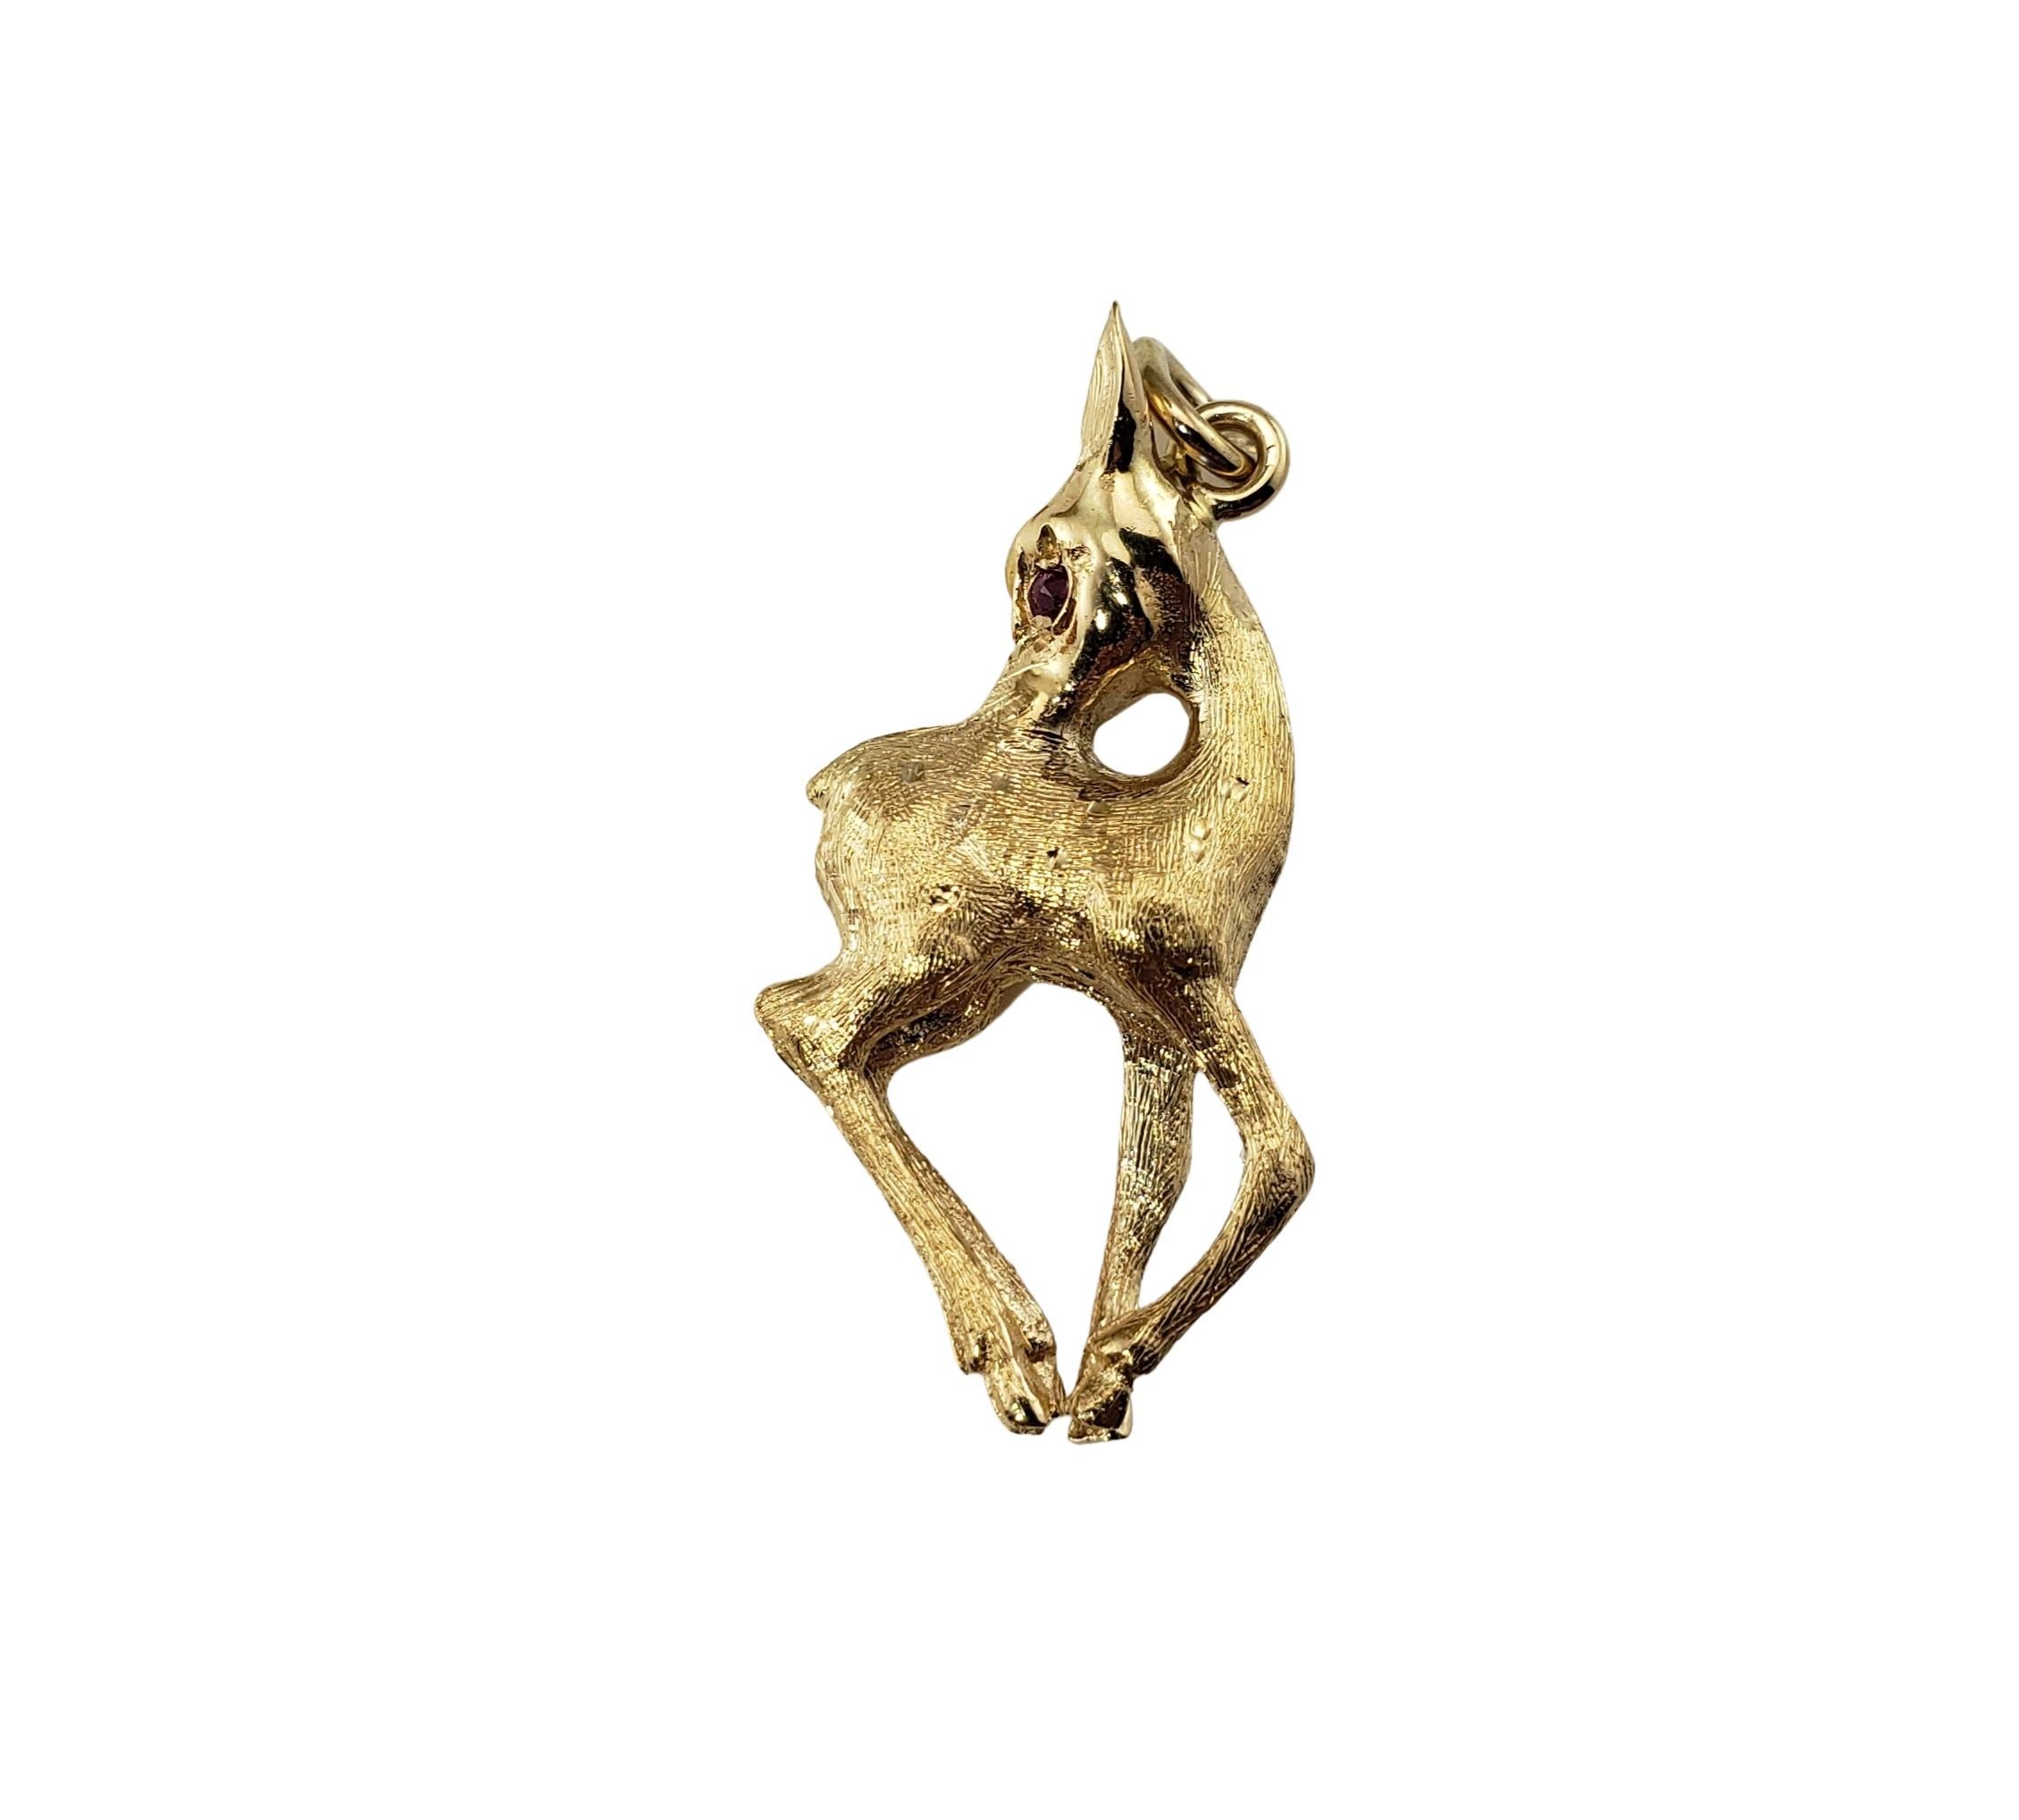 14 Karat Yellow Gold Deer Charm-

This adorable deer charm is crafted in beautifully detailed 14K yellow gold and accented with two synthetic ruby eyes.

Size:  25 mm x 14 mm

Weight:  2.3 dwt. /  3.6 gr.

Stamped: 14K

*Chain not included.

Very